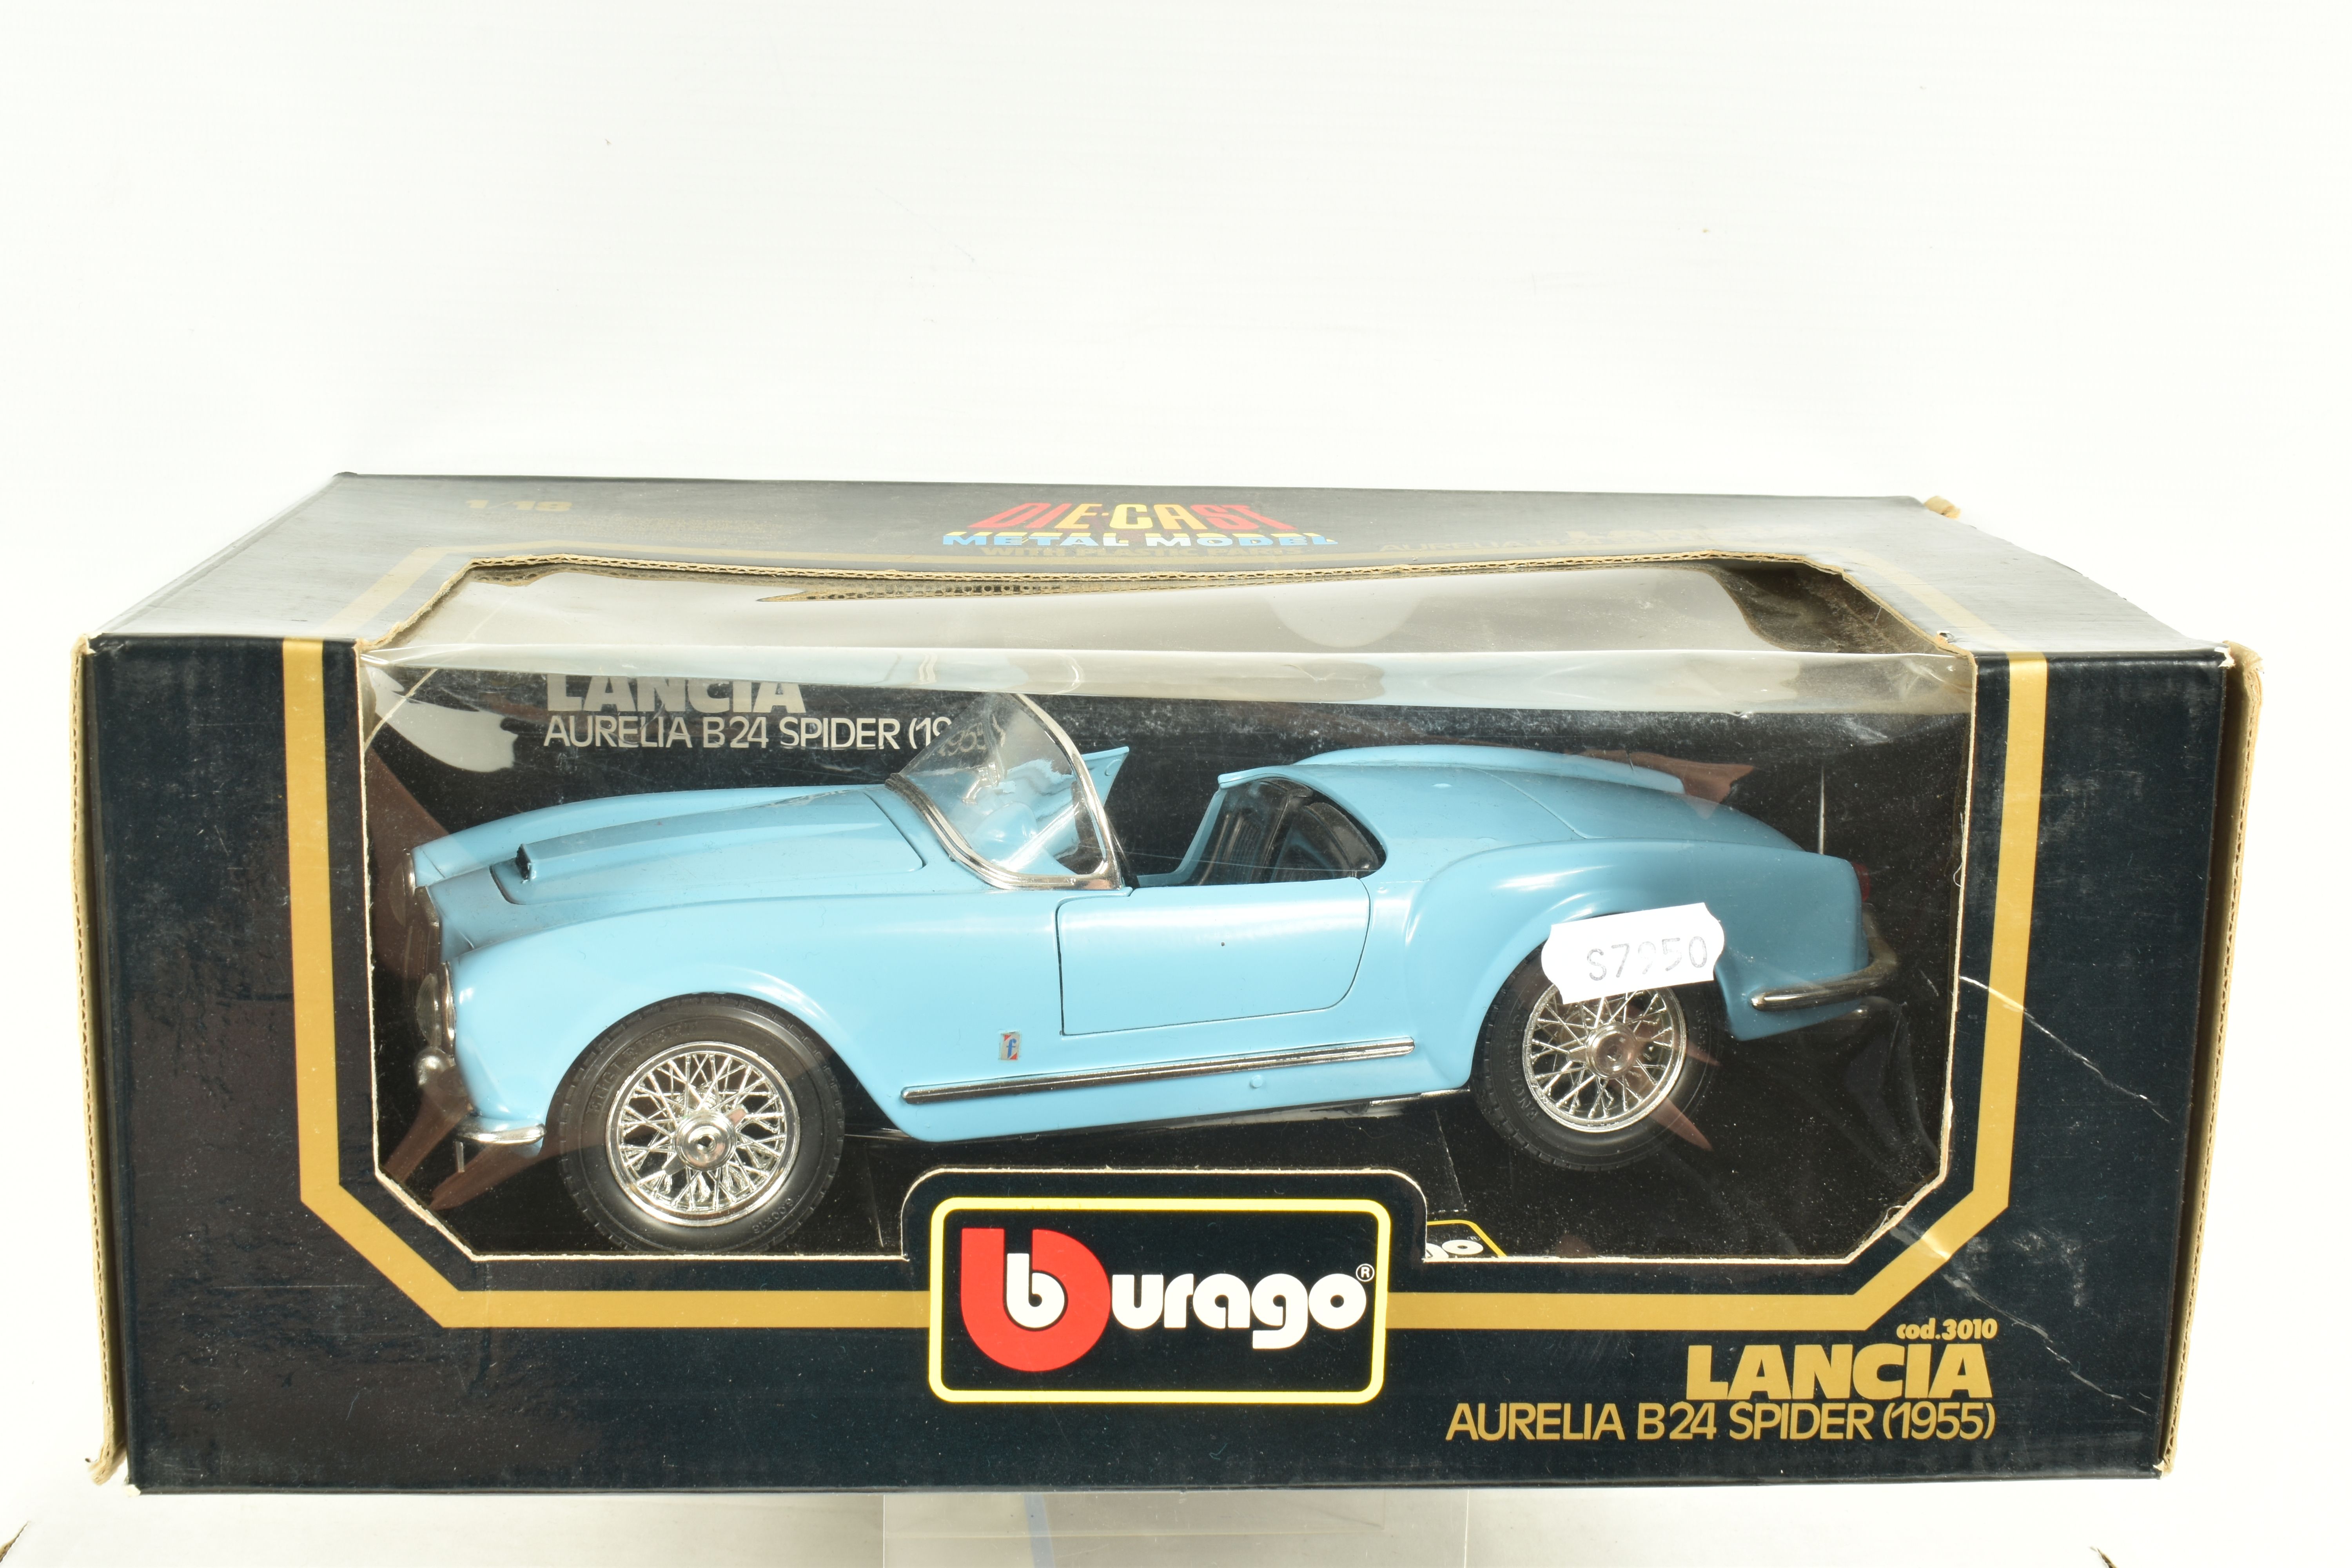 SIXED BOXED METAL DIECAST MODEL CARS, to include a Bburago 1932 Alfa Romeo 2300 Spider 1:18 scale, - Image 4 of 7